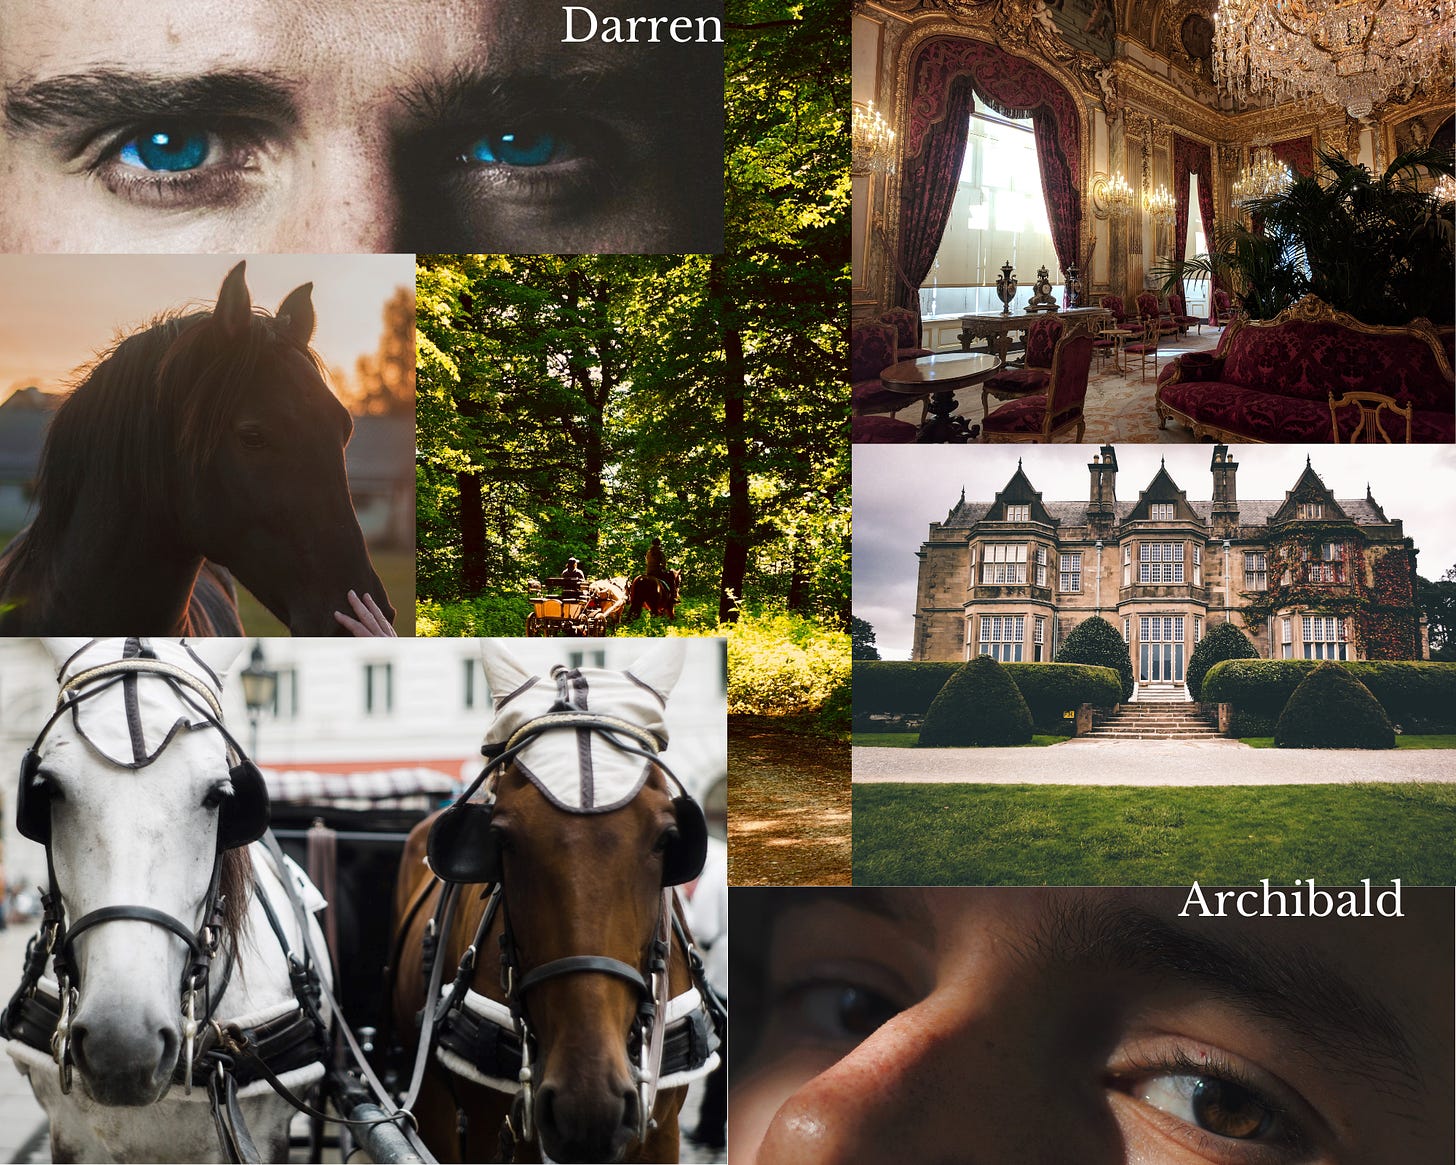 moodboard pic collage from top left a man's blue eyes, an ornate salon in gold and velvet, a mansion with hedges, a young man's brown eyes, a white and bay horse standing in front of a carriage, a black horse's head, a barouche in a forest. MC names Darren and Archibald